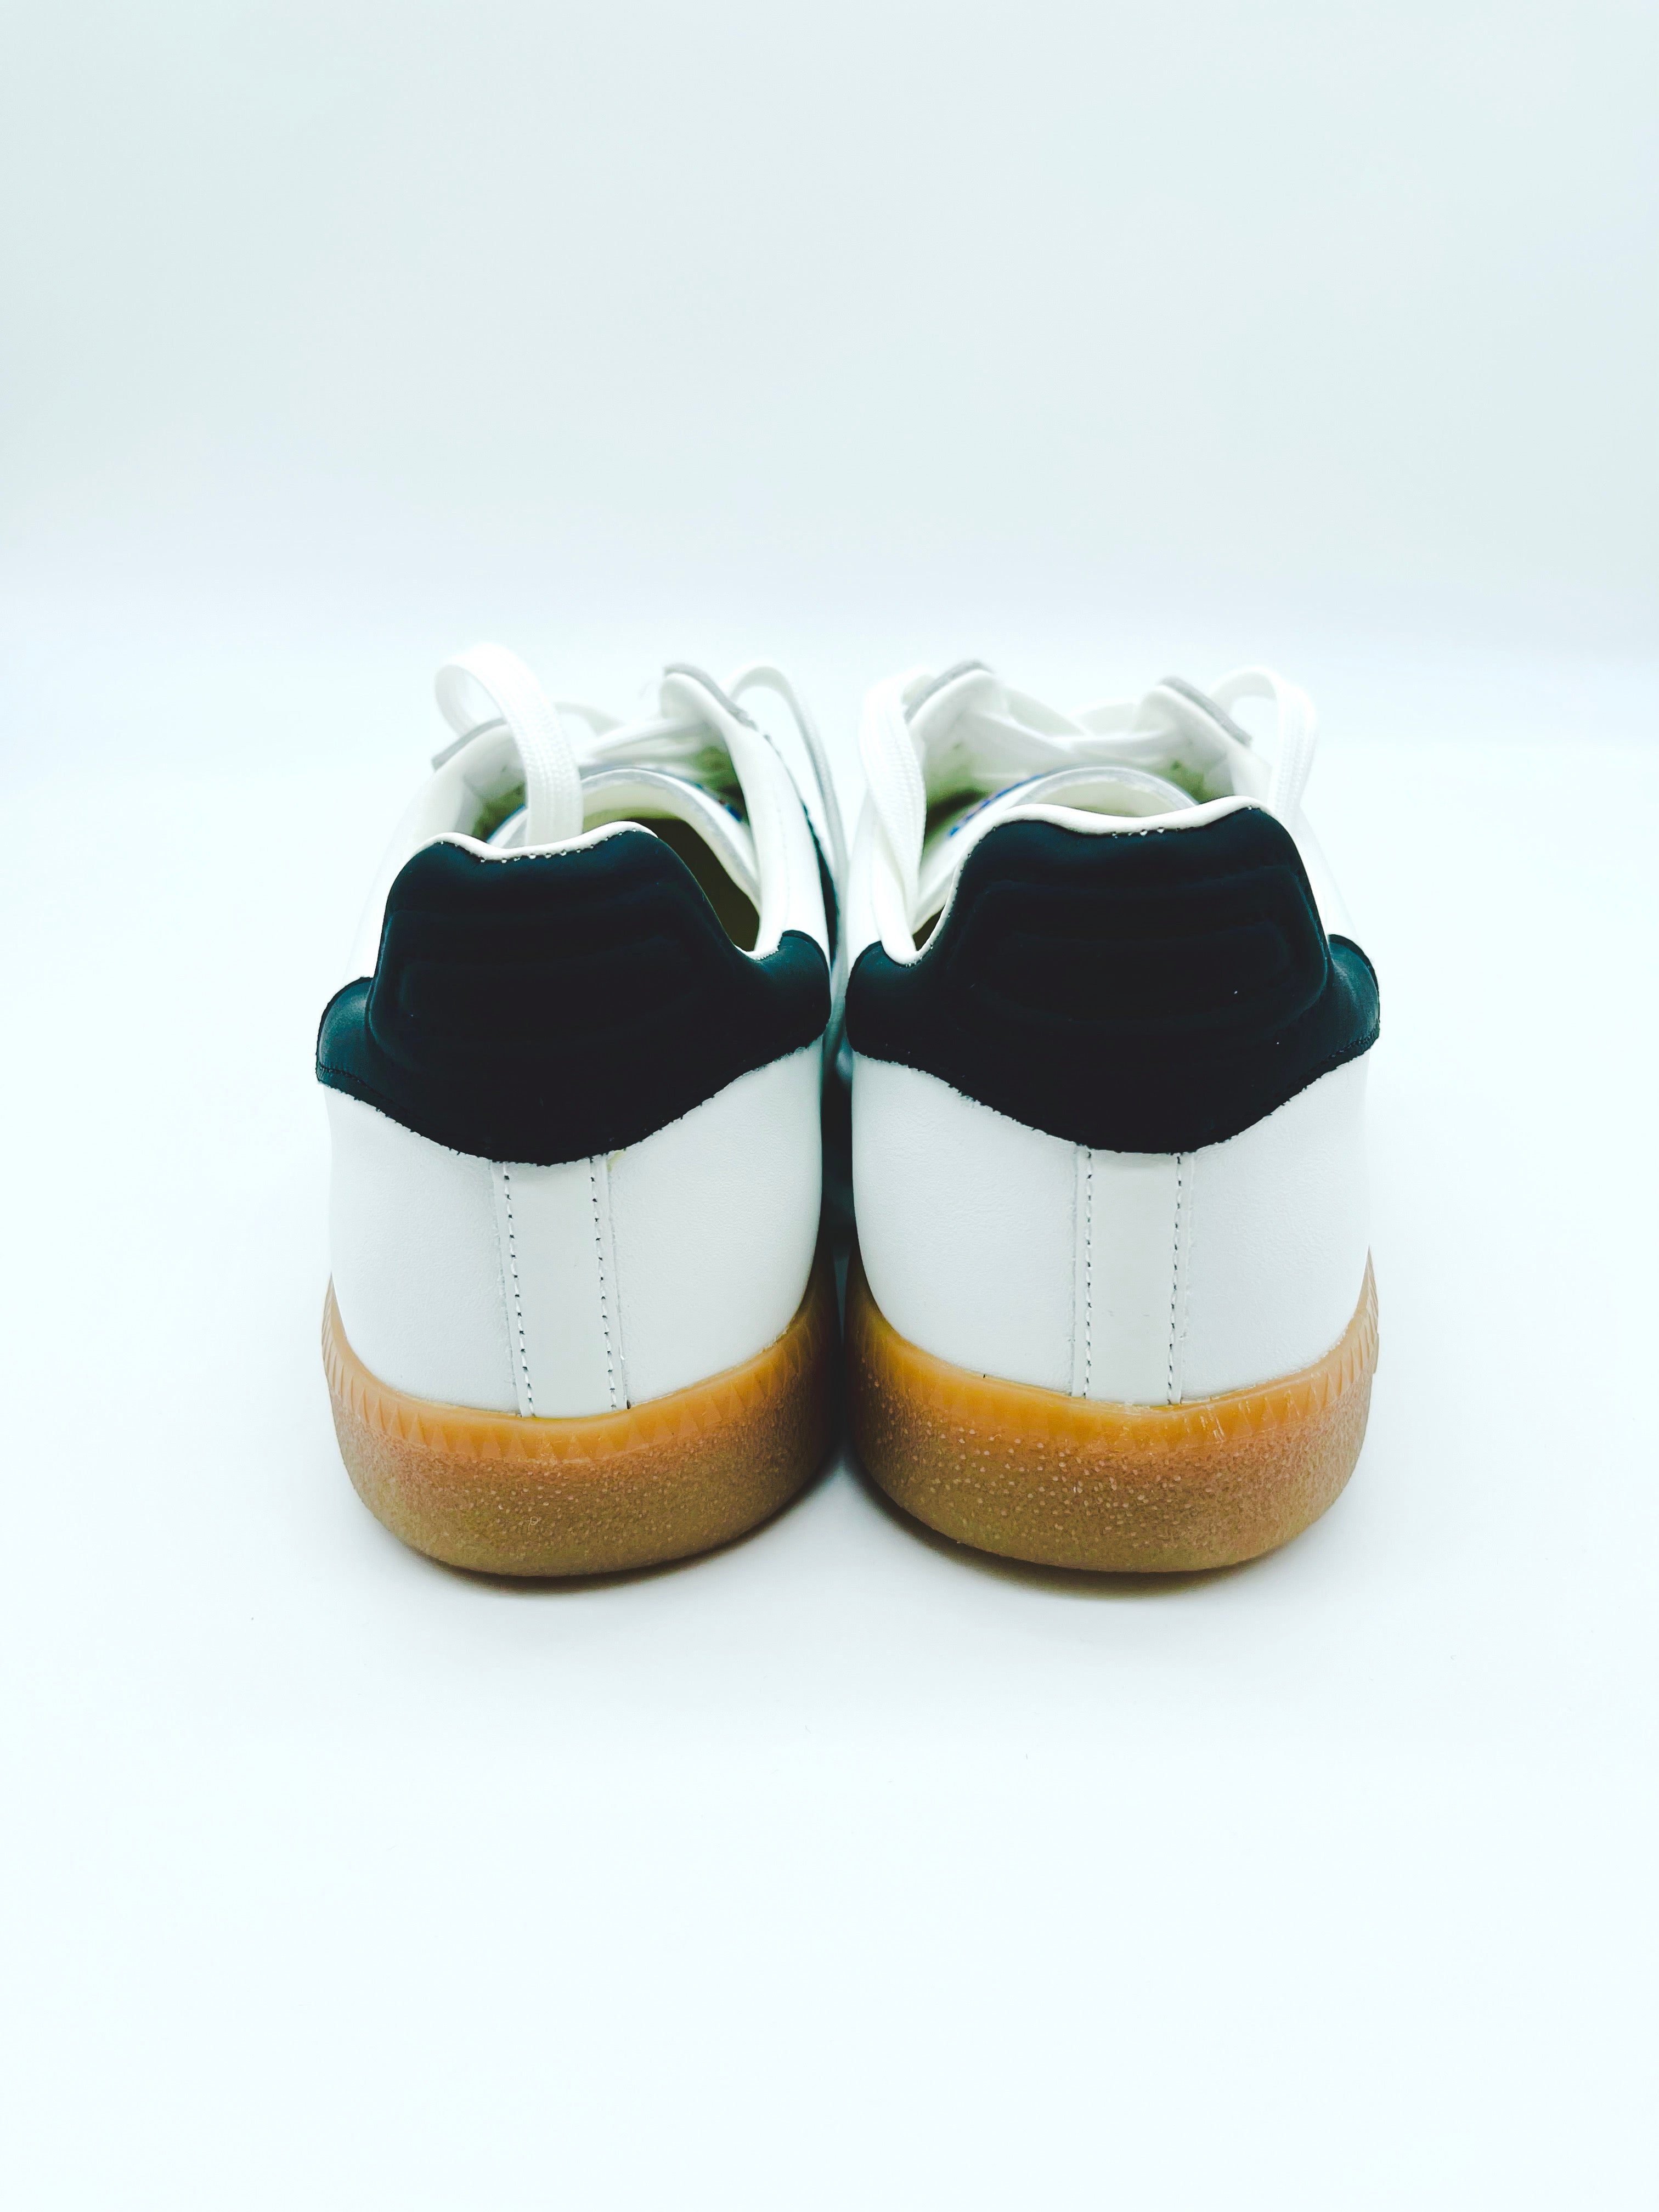 Back 70 Cloud Sneakers in White and Black-312 Shoes-Little Bird Boutique